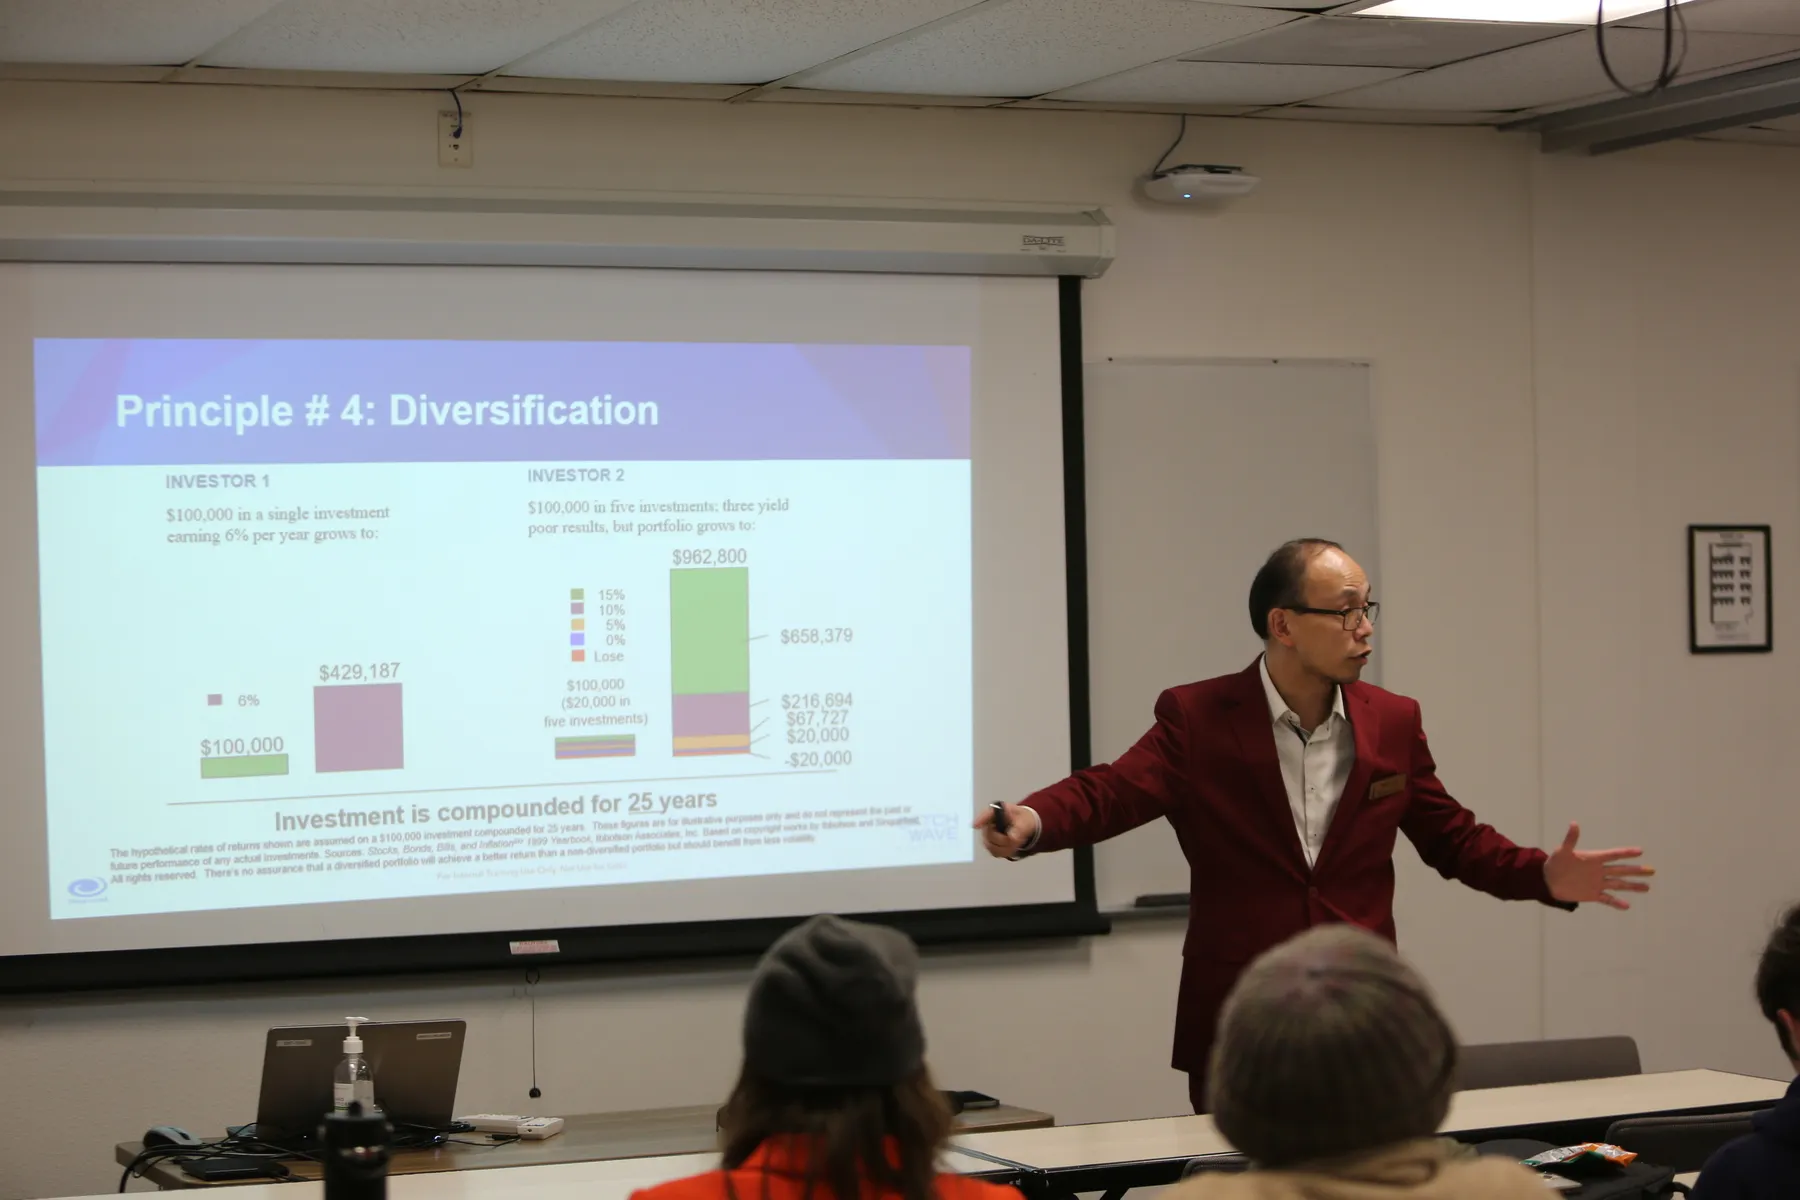 Sam Liu engaging the audience on financial diversification